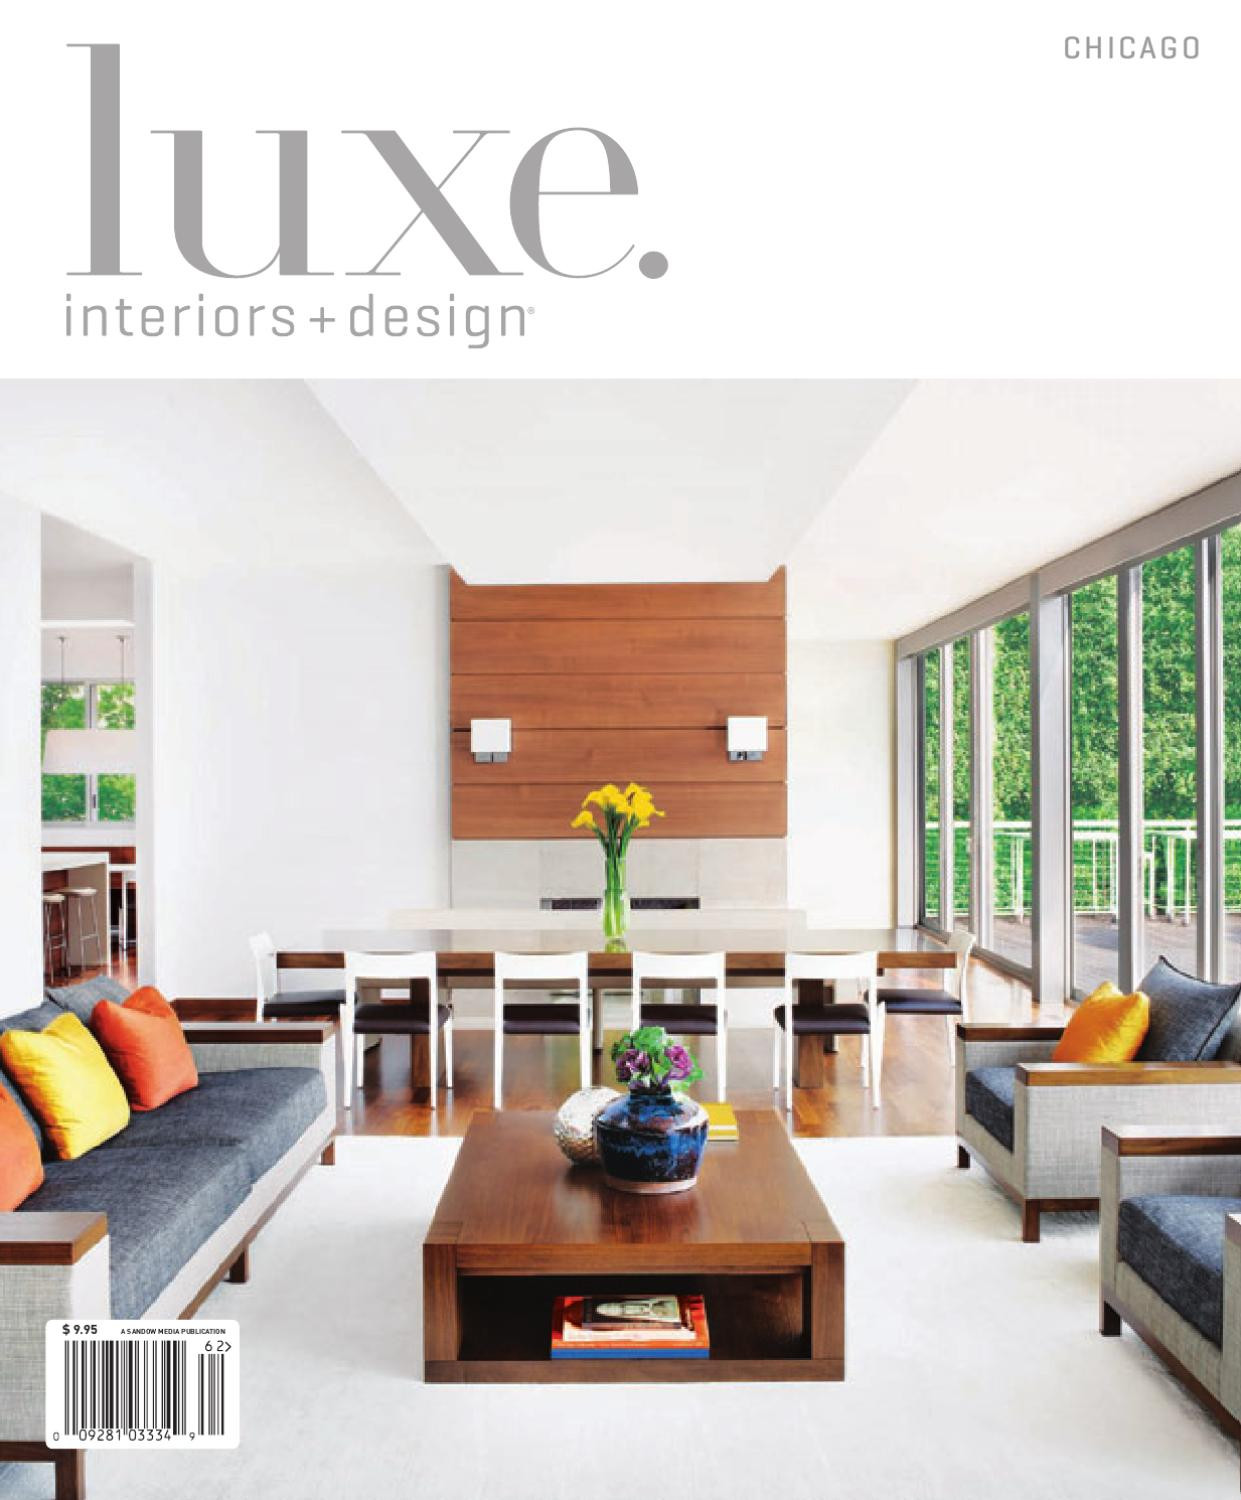 20 Perfect top Quality Hardwood Flooring Schiller Park Il 2024 free download top quality hardwood flooring schiller park il of luxe interior design chicago by sandow media issuu throughout page 1